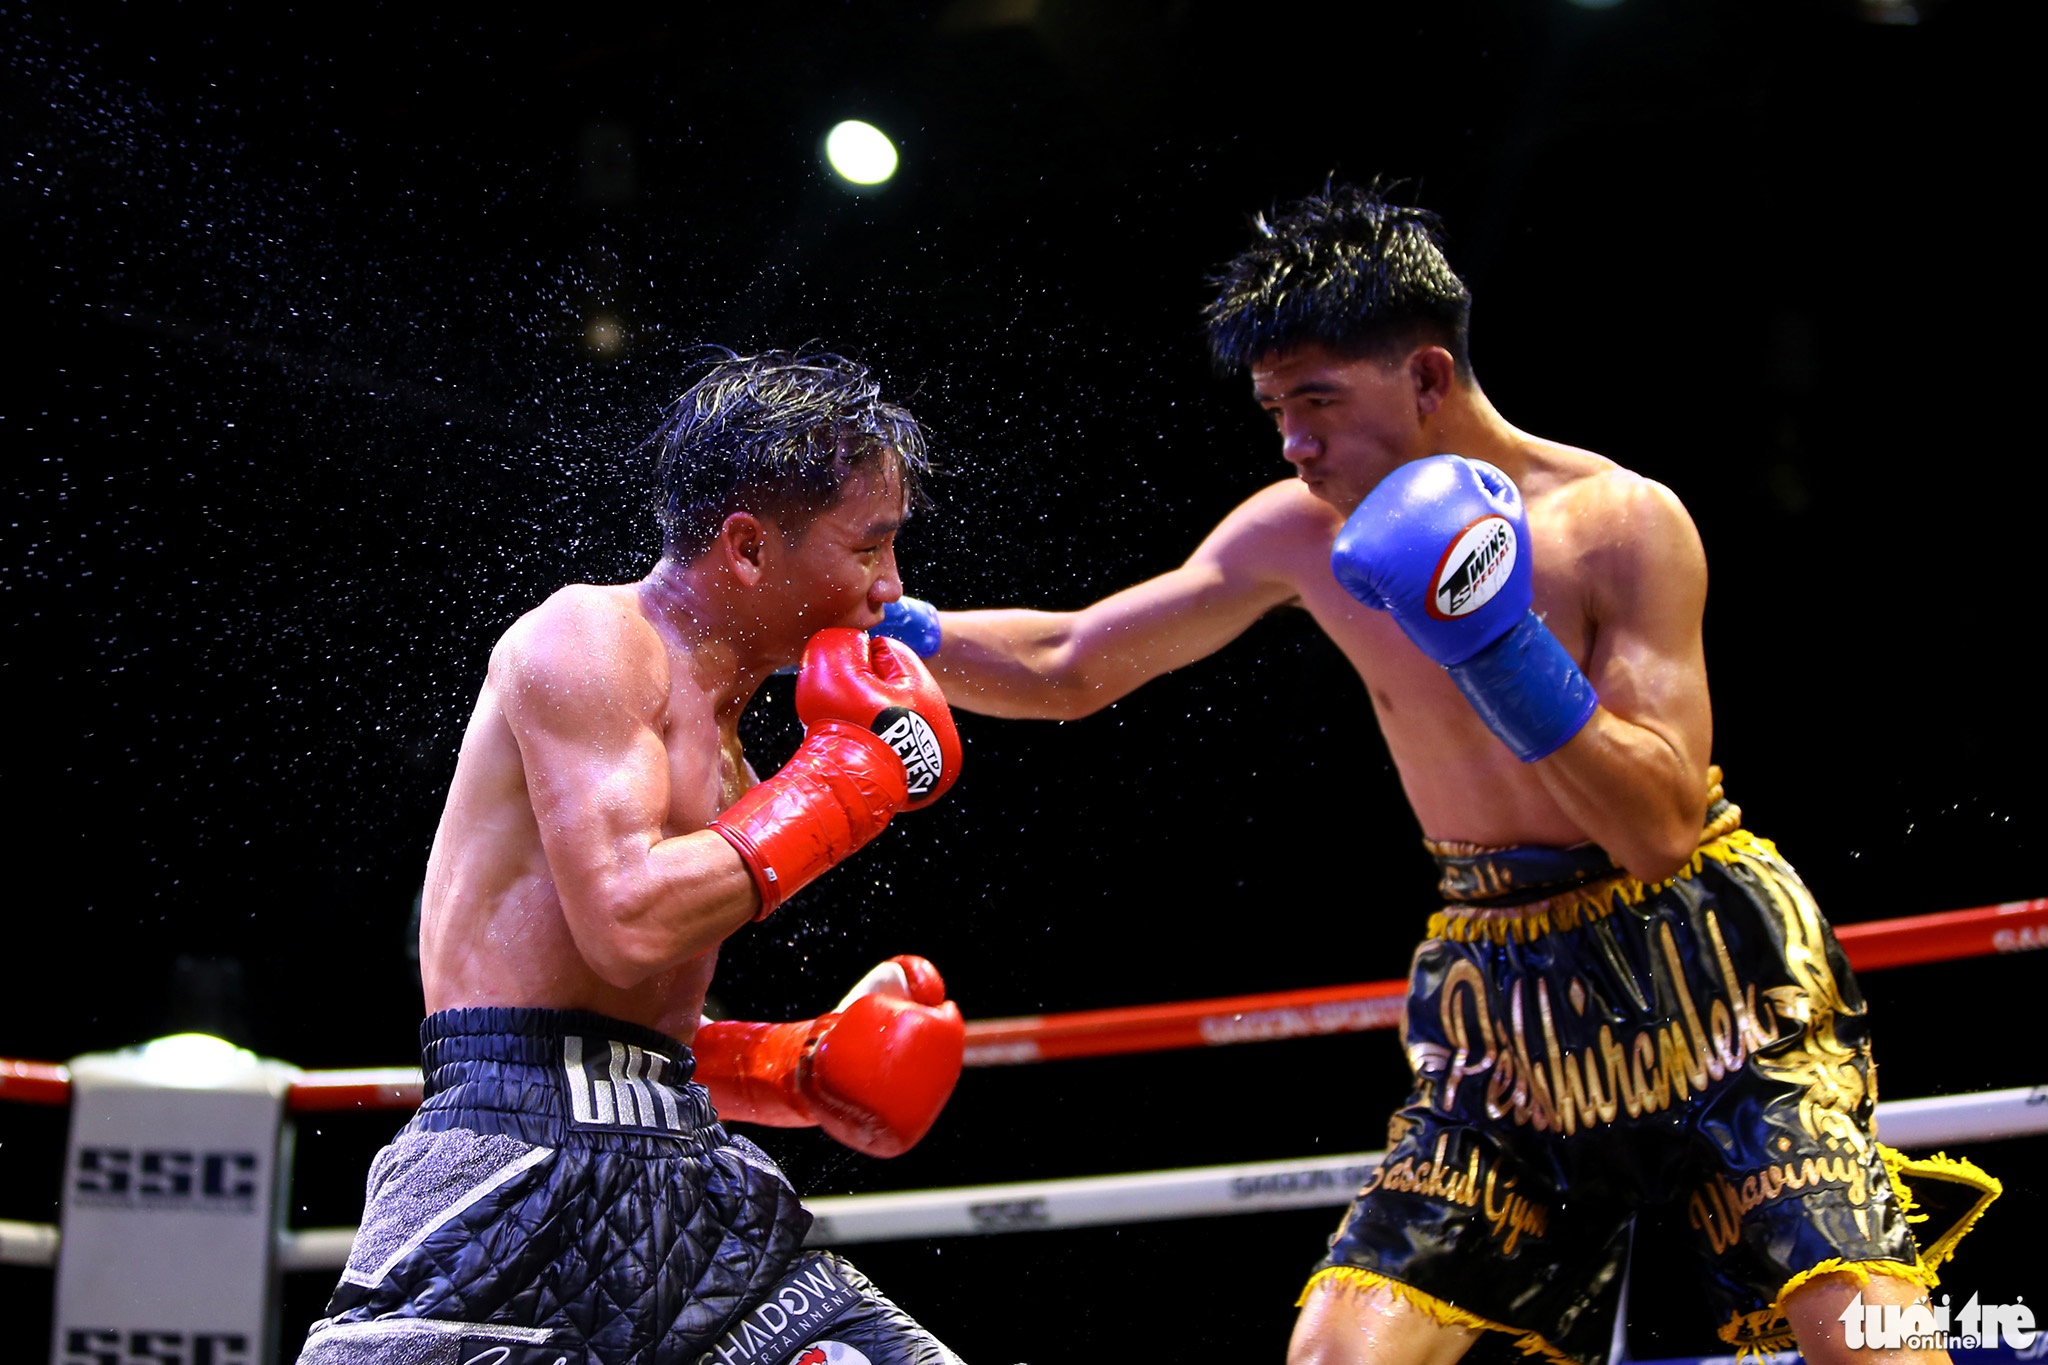 Vietnamese boxer Le Huu Toan (left) competes for the minimum weight class at the WBA Asia Championship in Ho Chi Minh City, March 20, 2022. Photo: Hoang Tung / Tuoi Tre